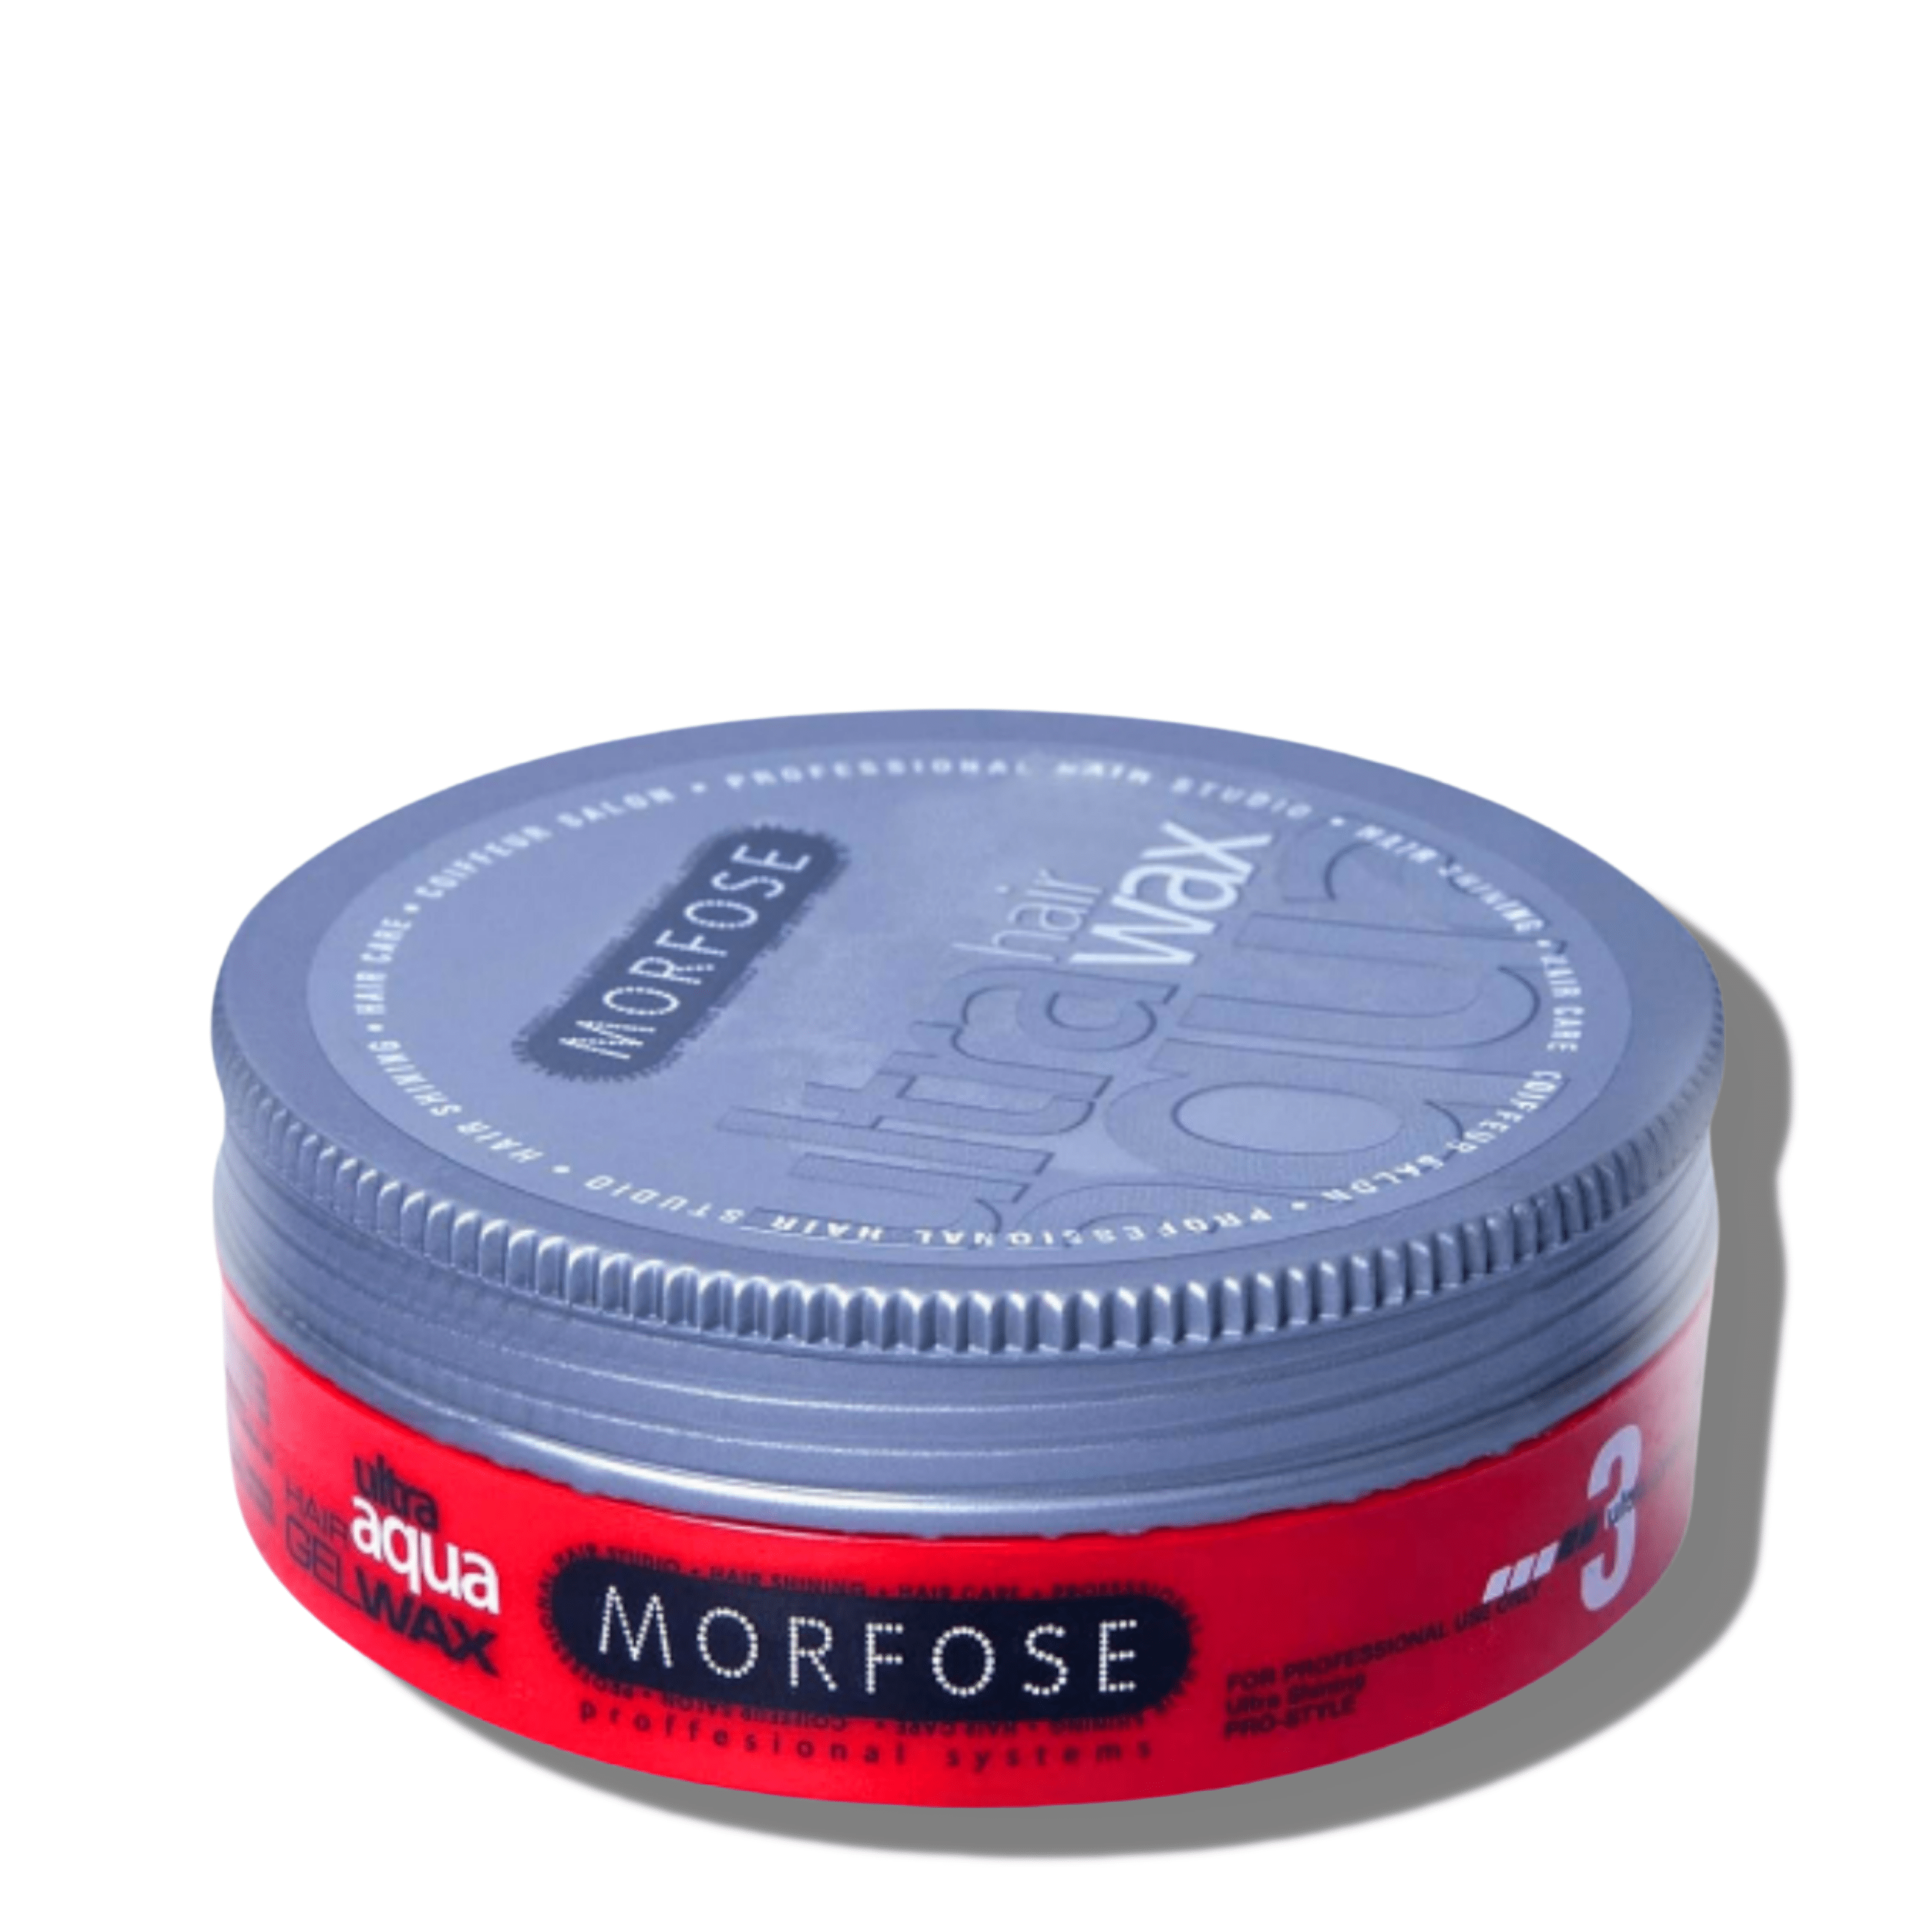 Morfose Deep Aqua Hair Gel Wax with Shiny and Strong Flexible 5 Hold,  Manage Flyaways, Braids, and Curls, Professional Hair Styling for Women and  Men